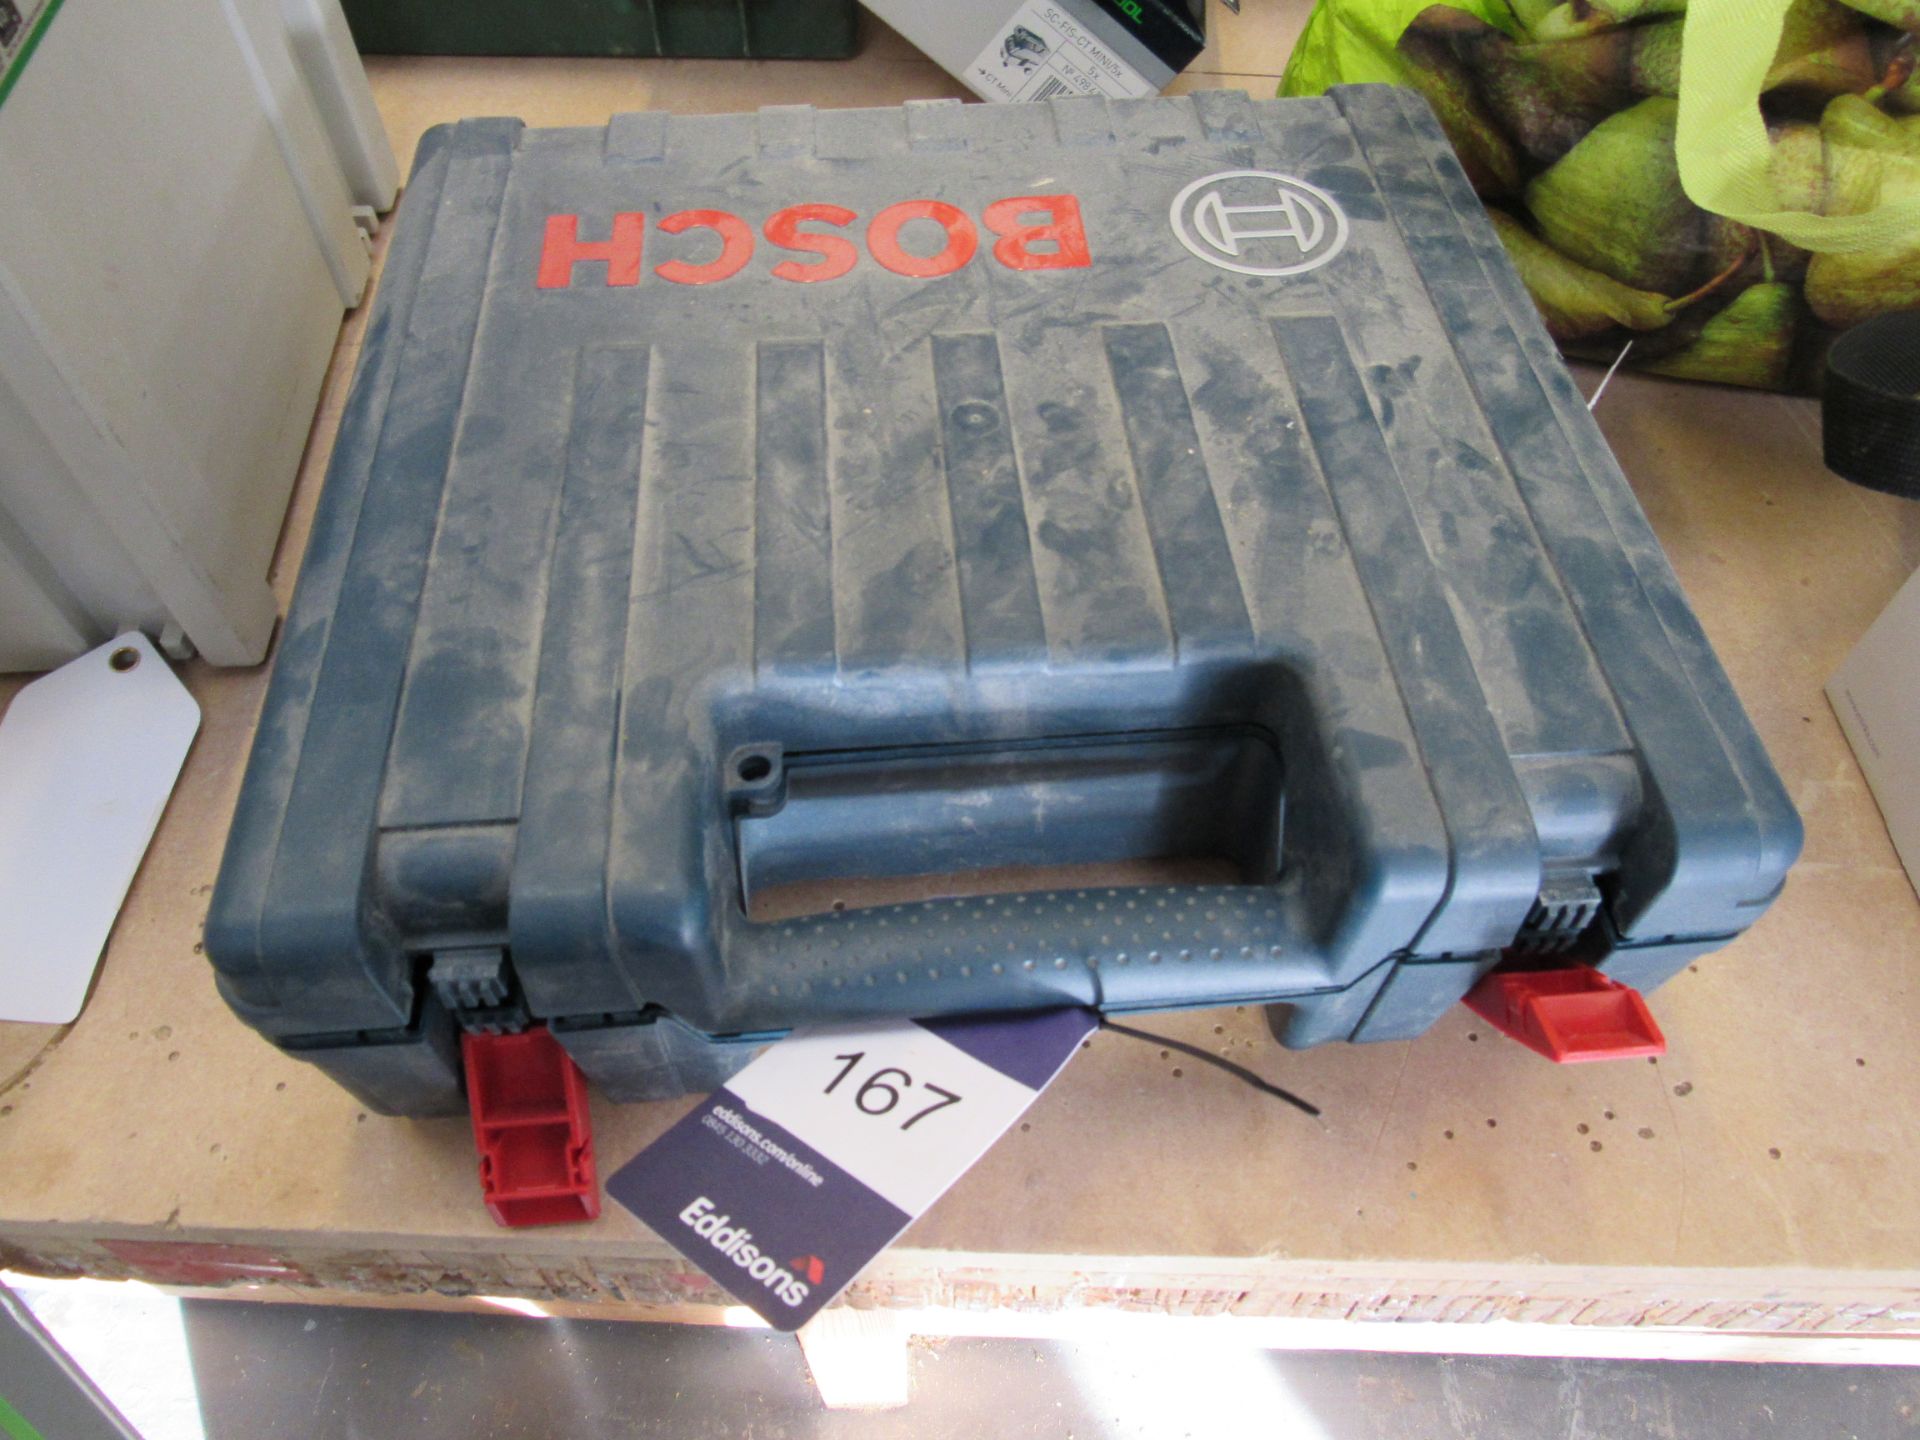 Bosch GSB 19-2RE Hammer Drill, 240V with case - Image 3 of 3